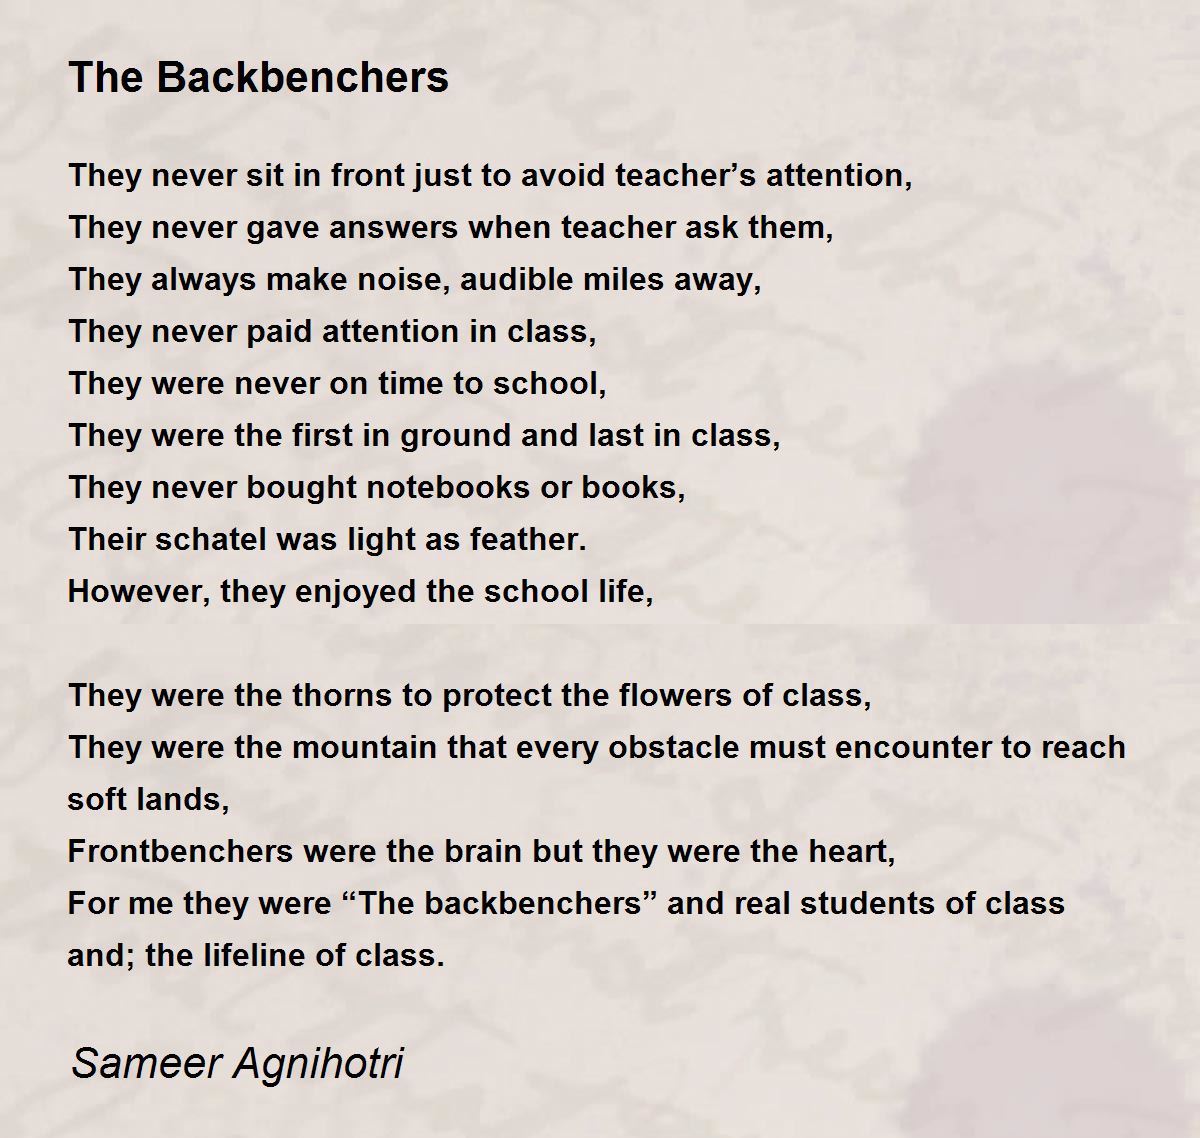 The Backbenchers - The Backbenchers Poem by Sameer Agnihotri